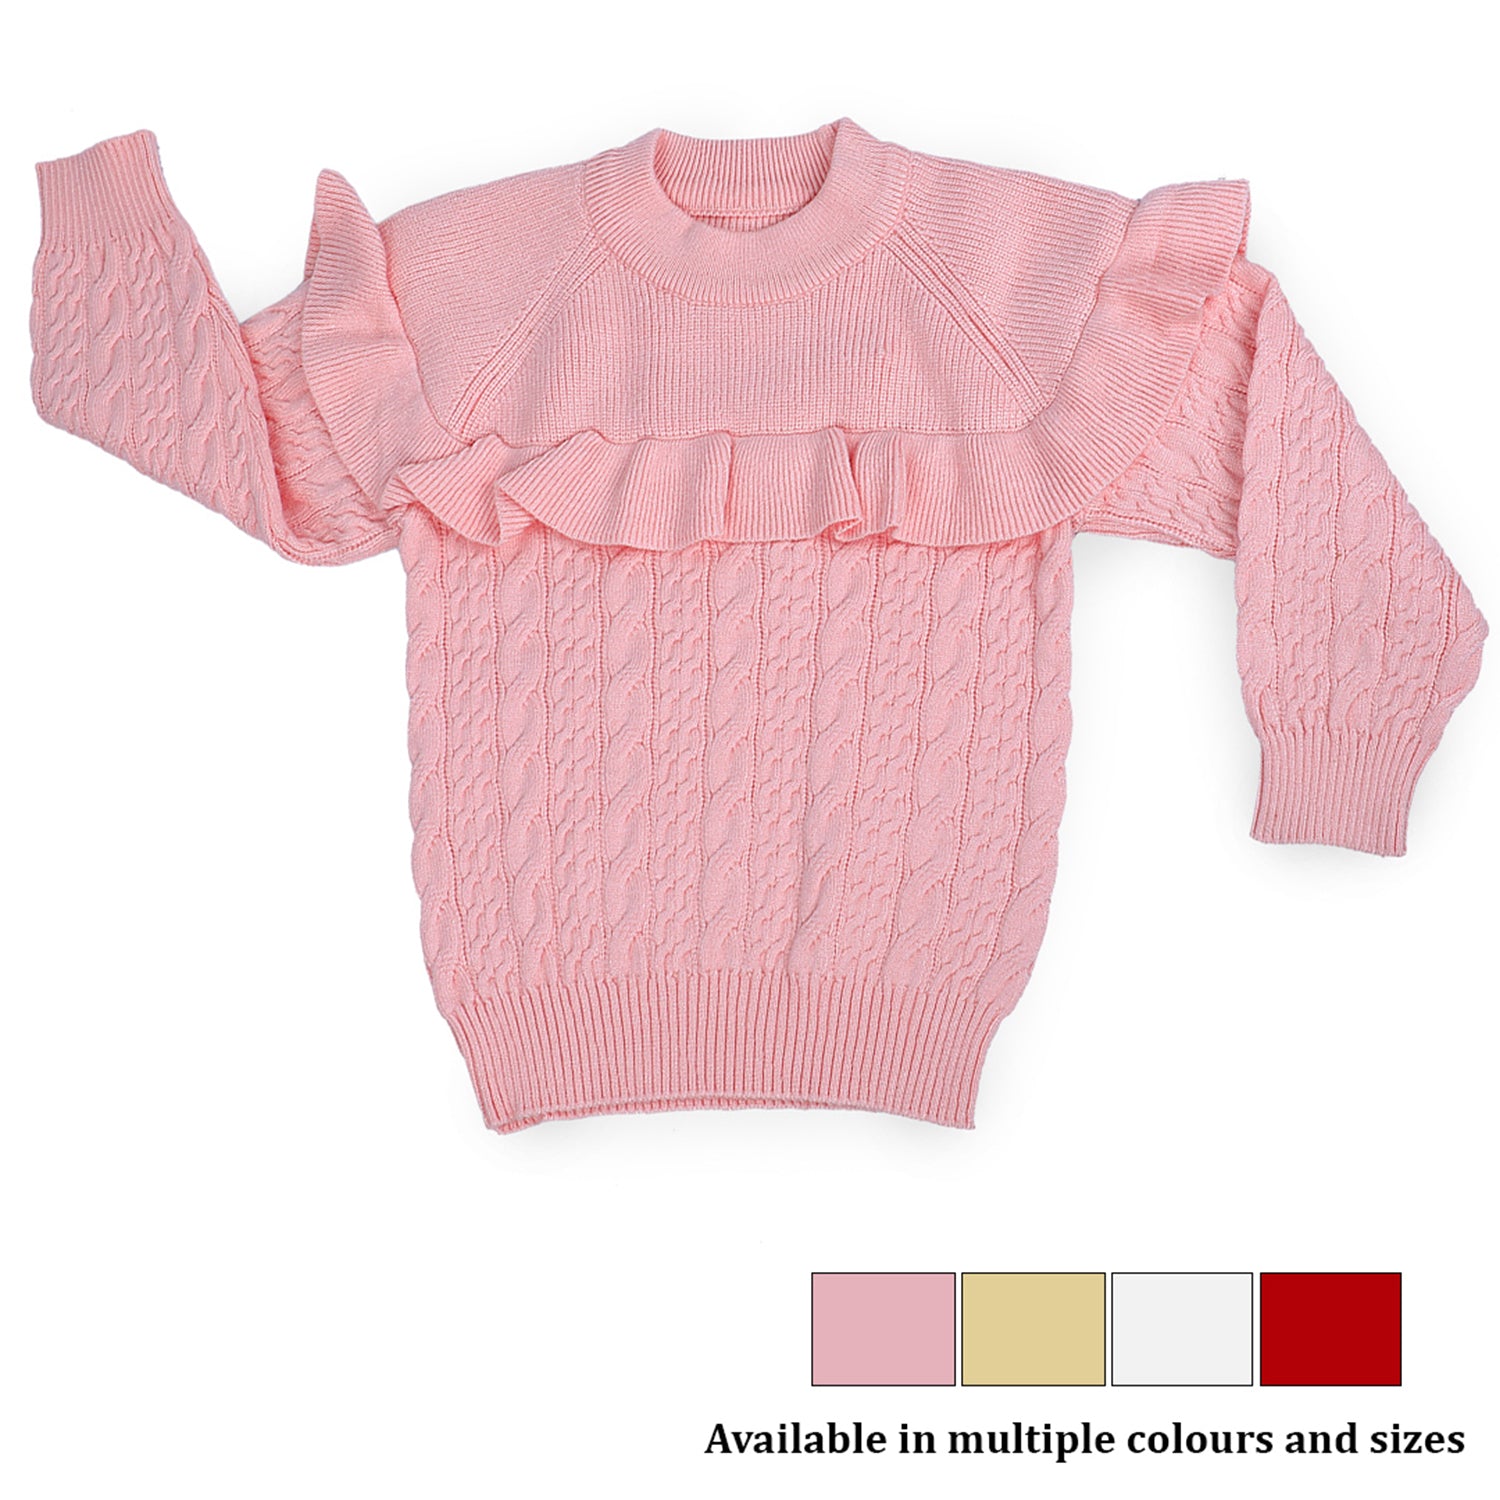 Ruffled Jumper Solid Premium Full Sleeves Braided Knit Sweater - Pink